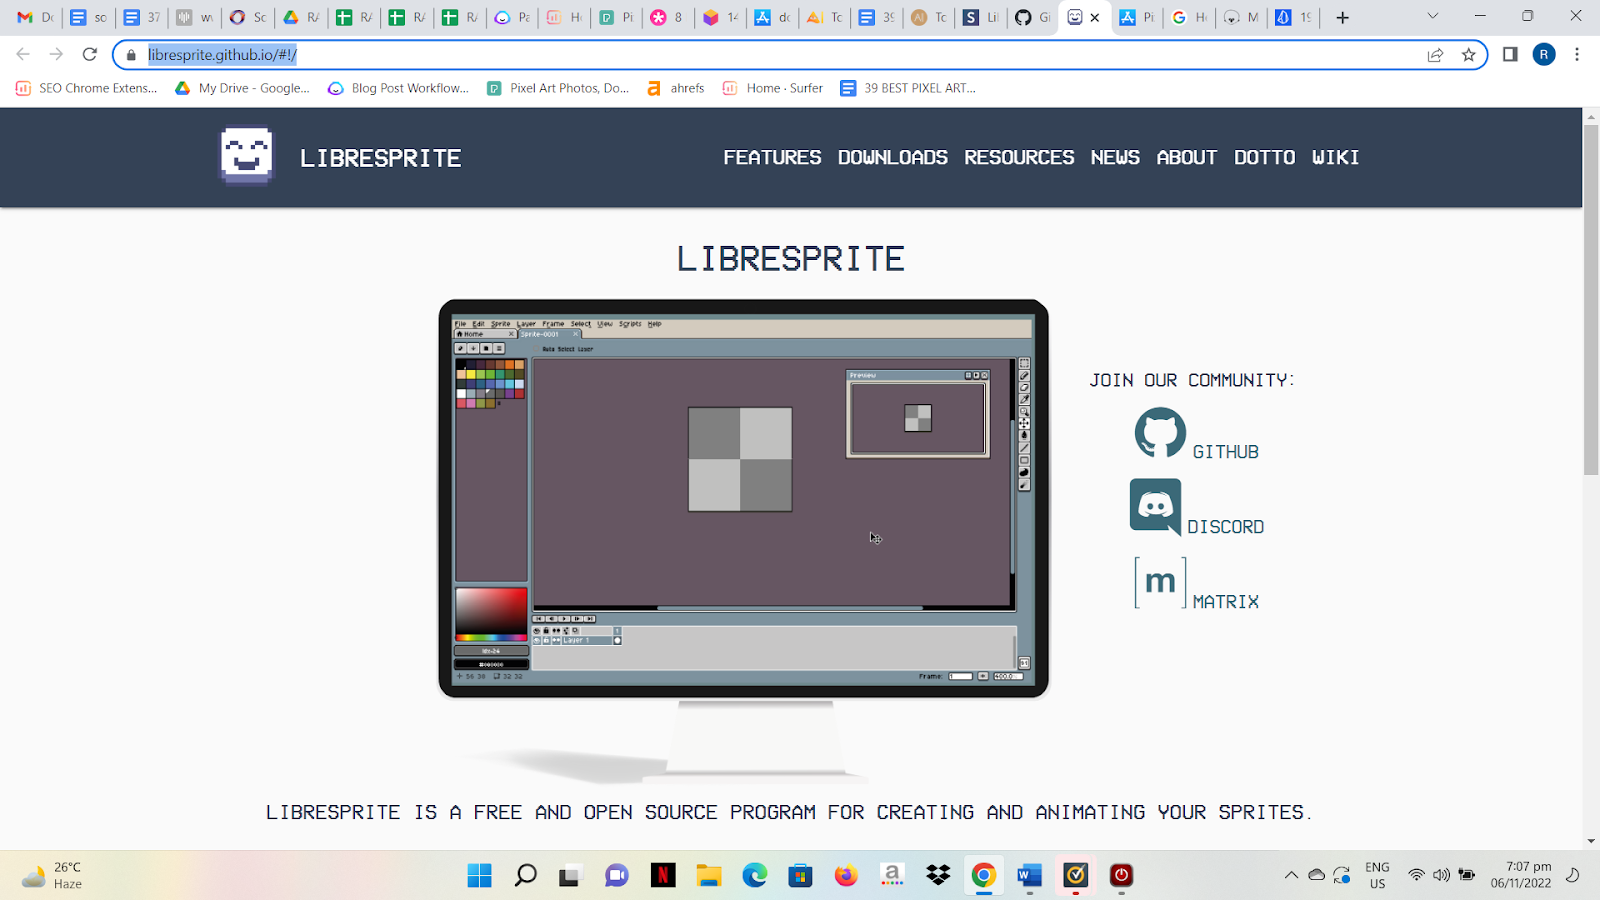 LibreSprite:free and open source program for creating and animating sprites.